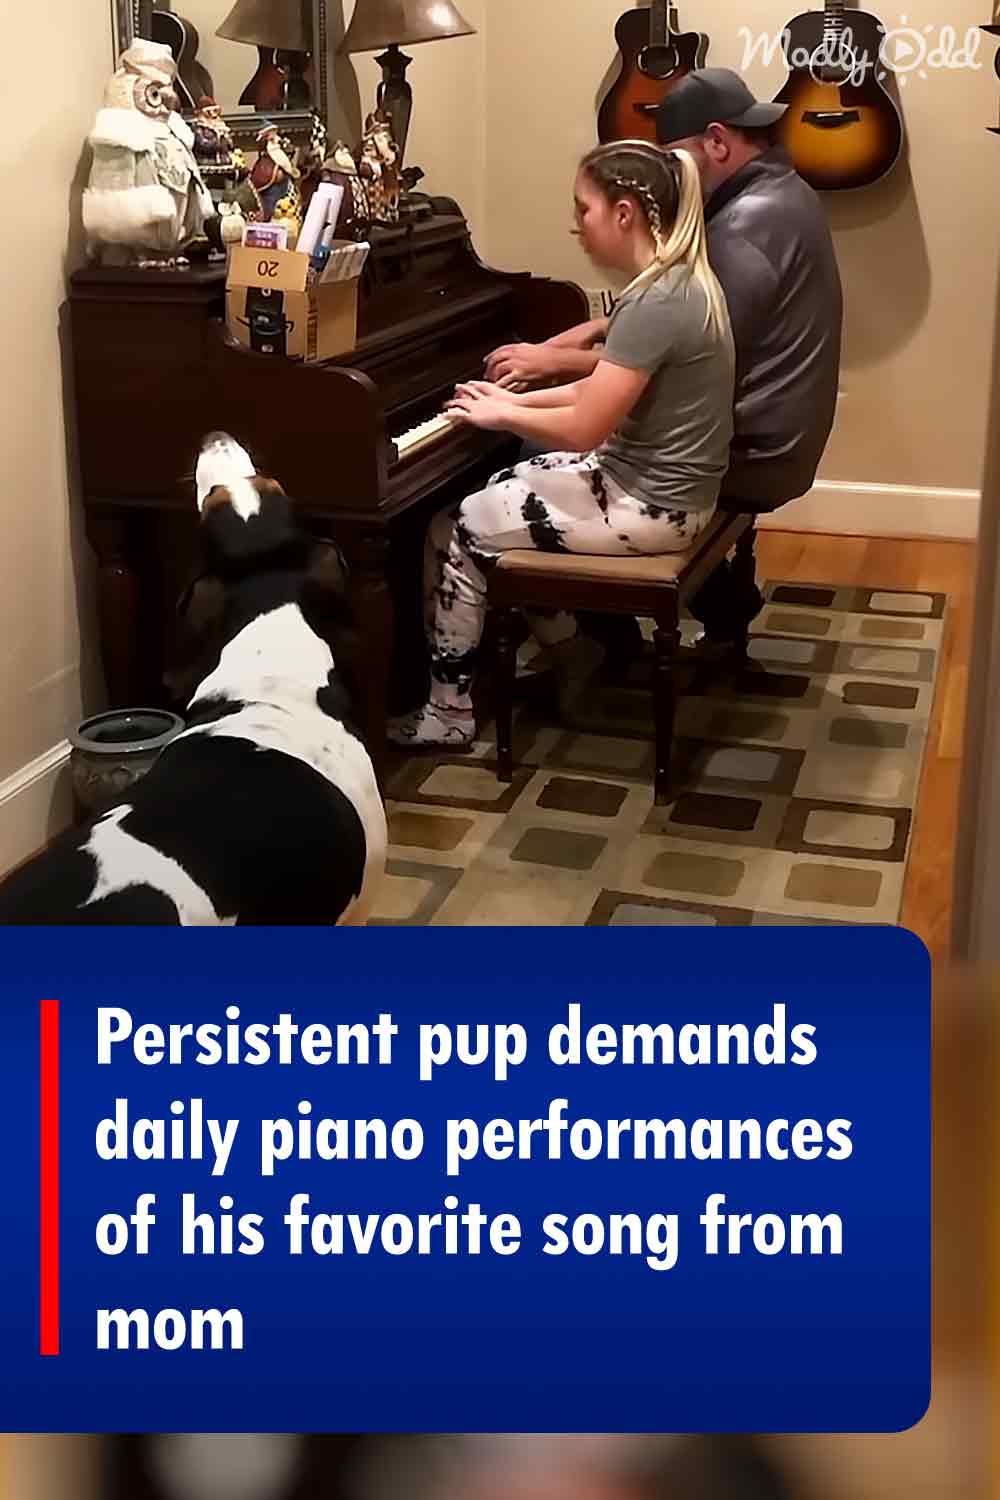 Persistent pup demands daily piano performances of his favorite song from mom